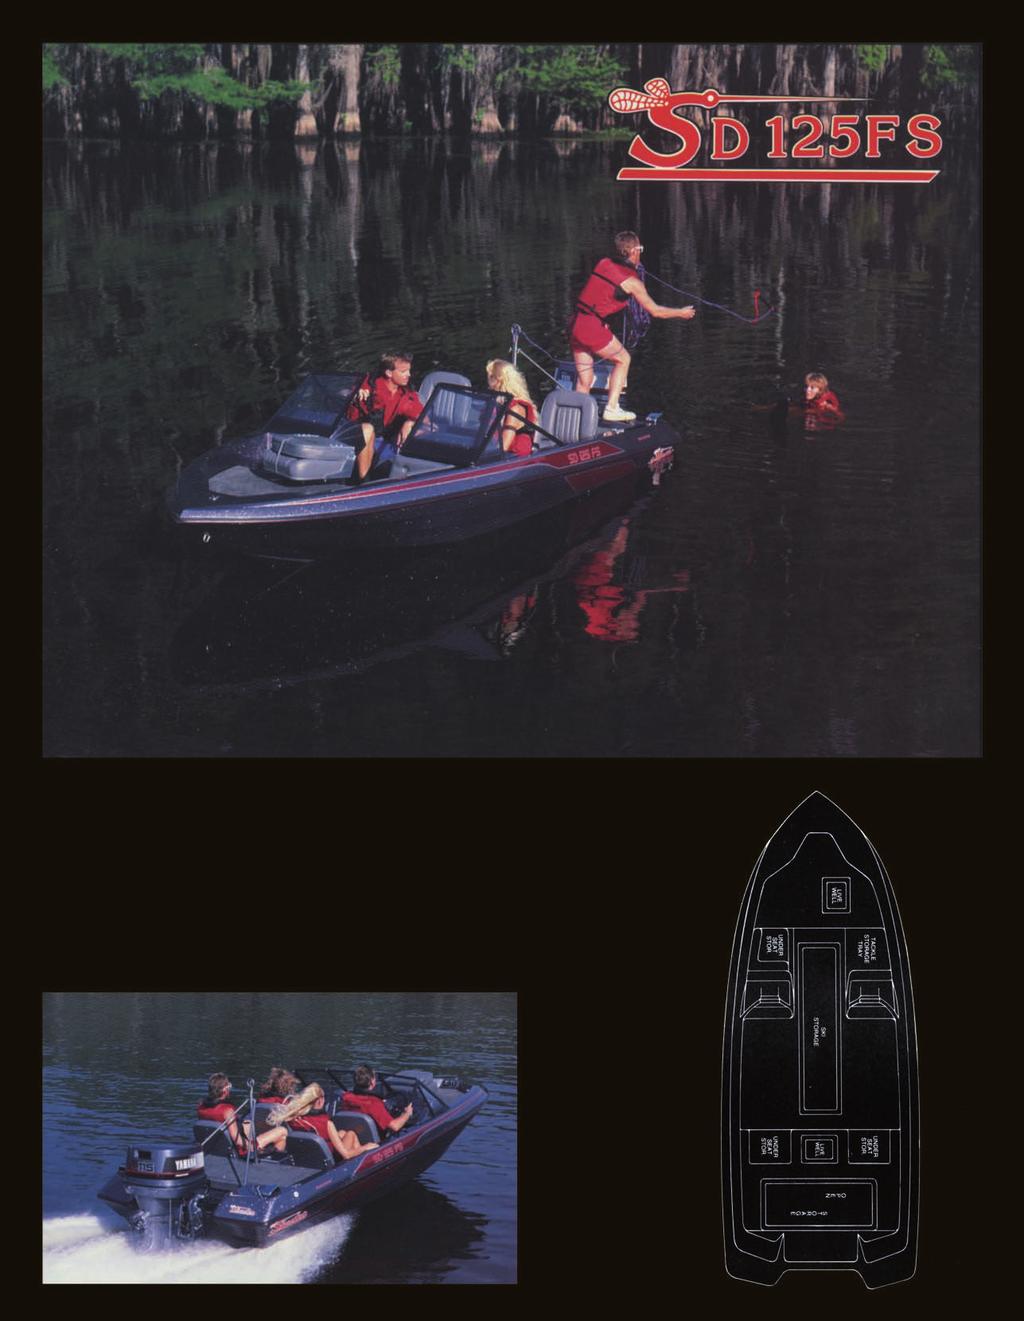 Y ou ll get the same performance of the SD125 combined with sleek ski boat performance.